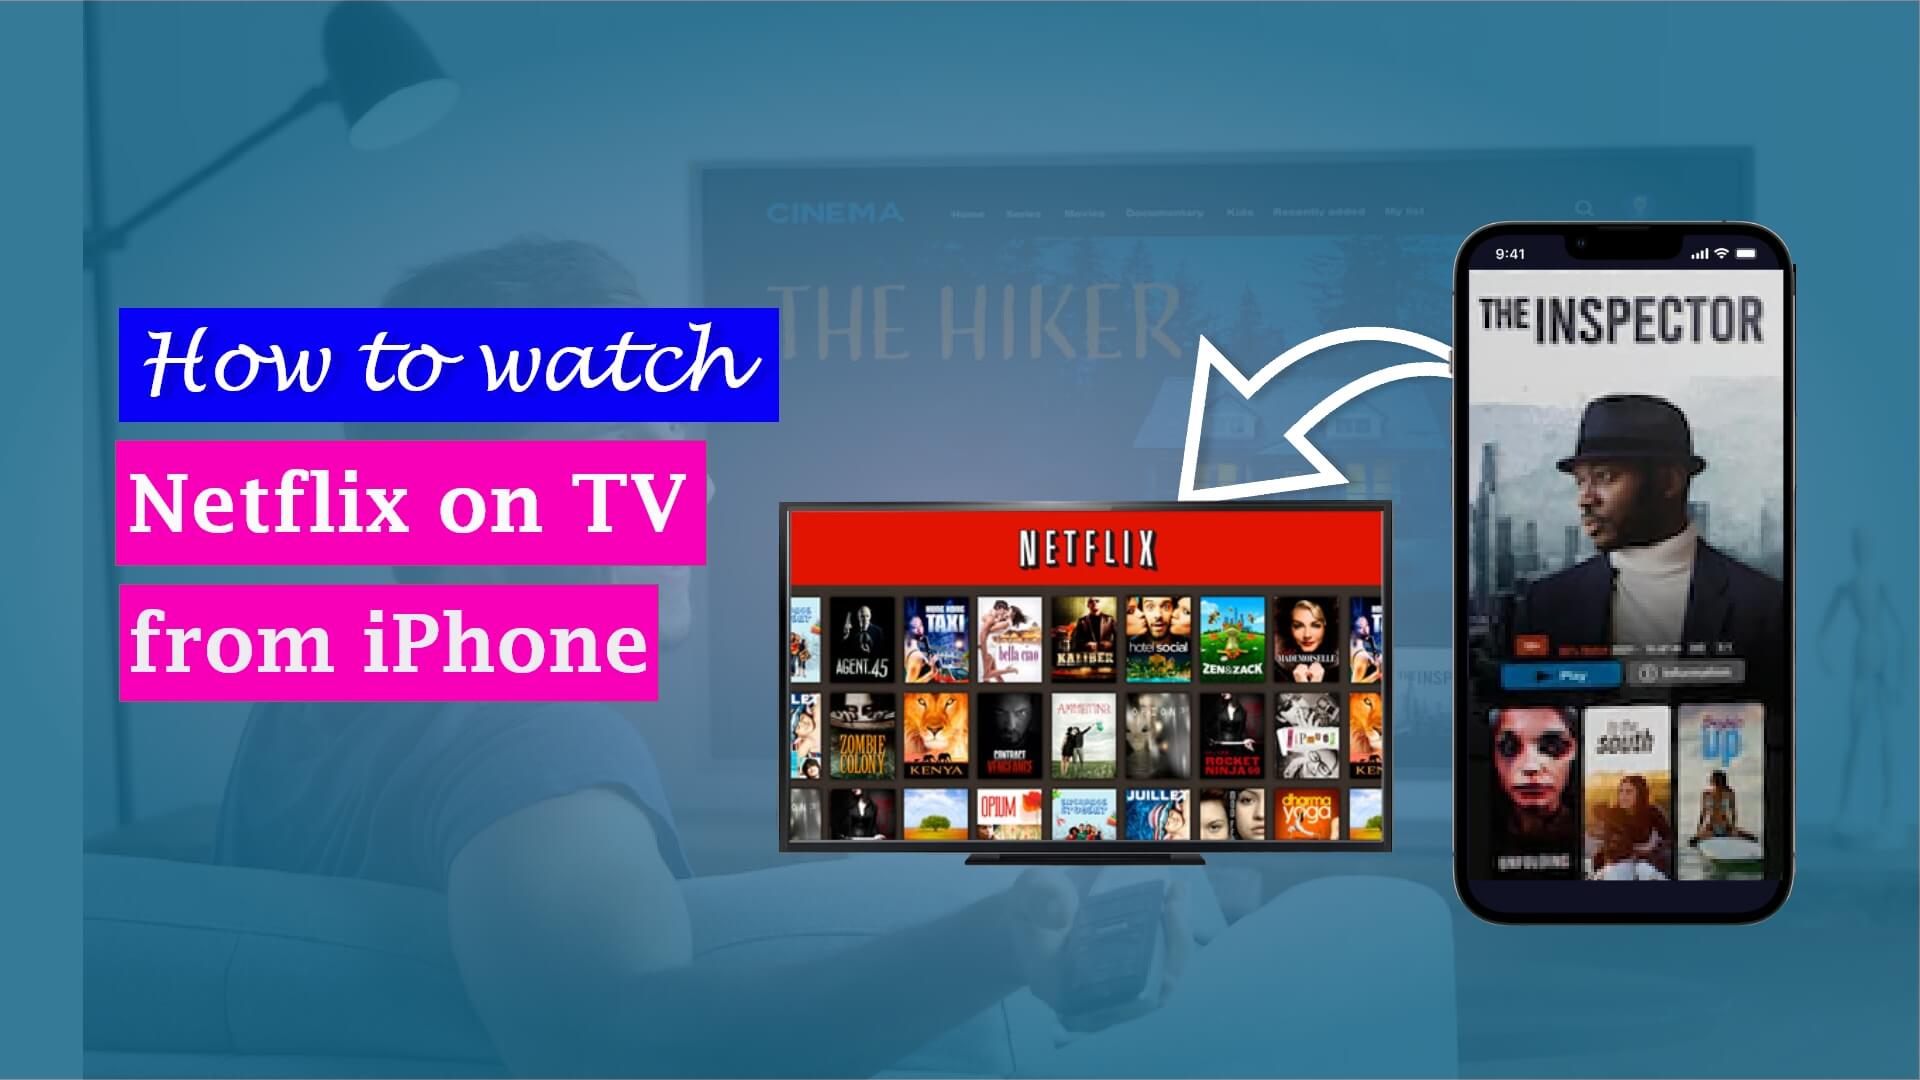 How to Watch Netflix on TV from iPhone – A Full Guide